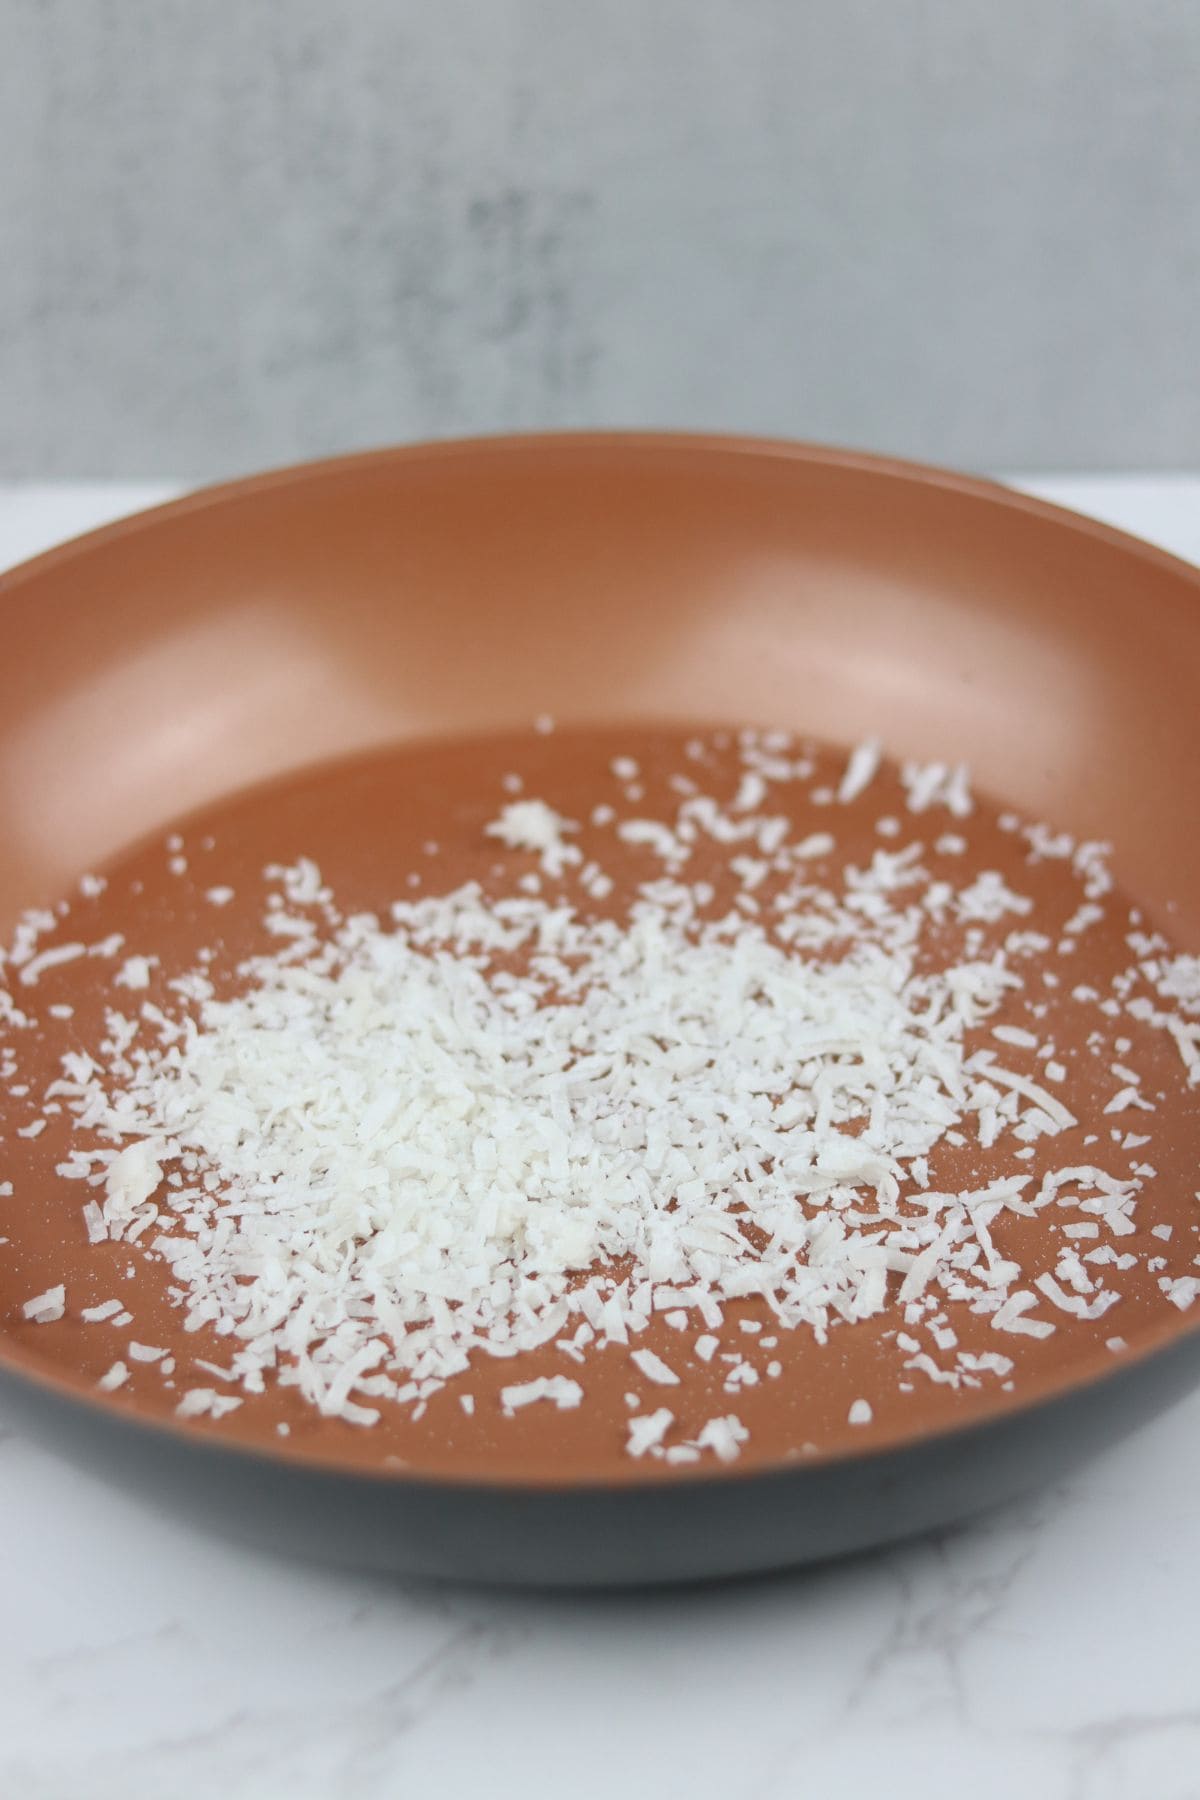 shredded coconut in a frying pan ready for toasting